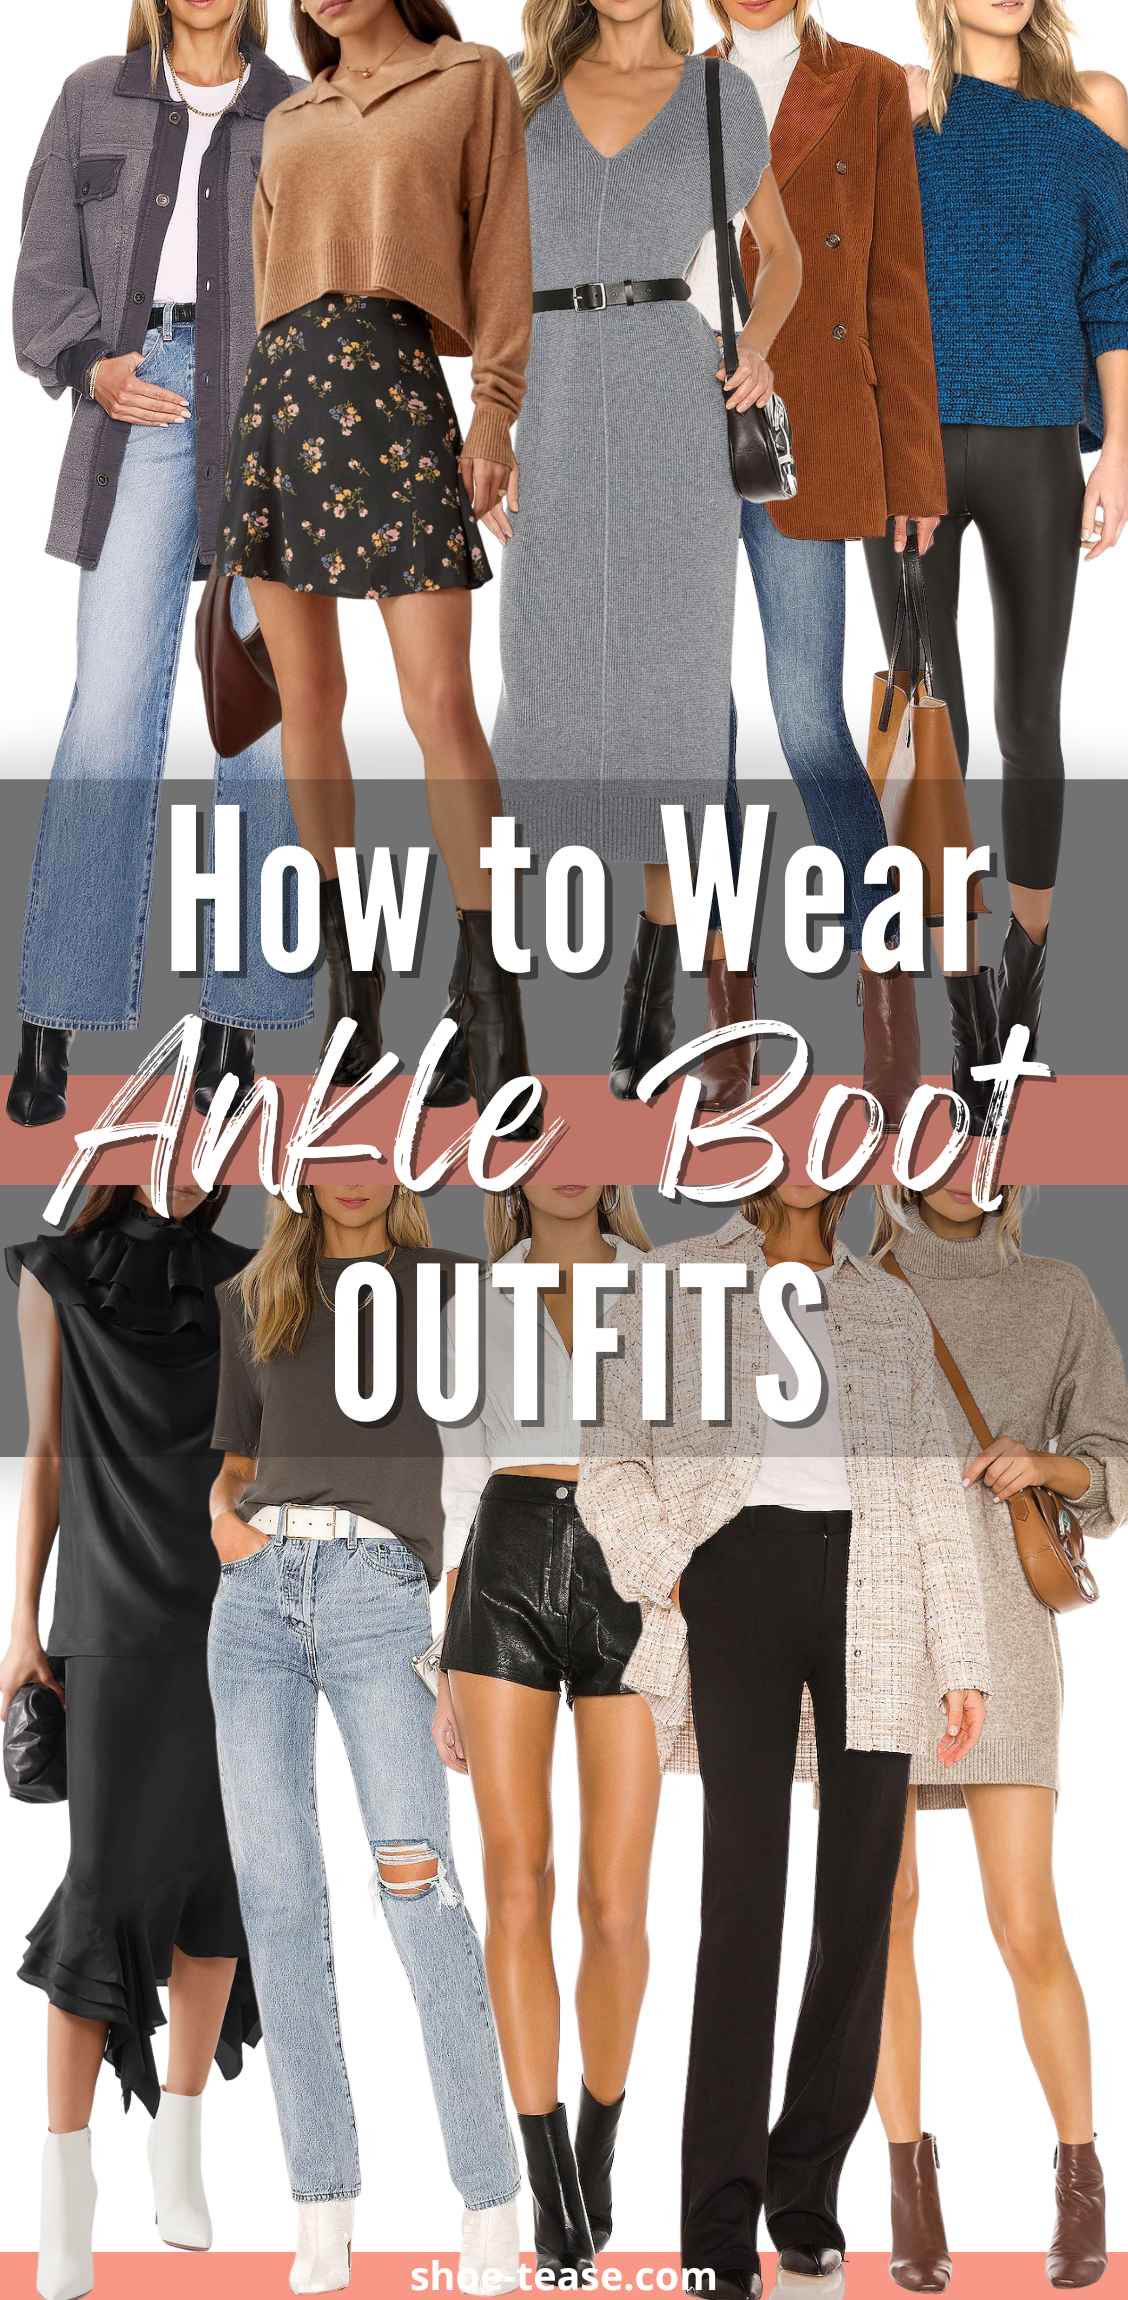 Collage of 10 women wearing different ankle boots outfits under text reading how to wear ankle boots outfits.